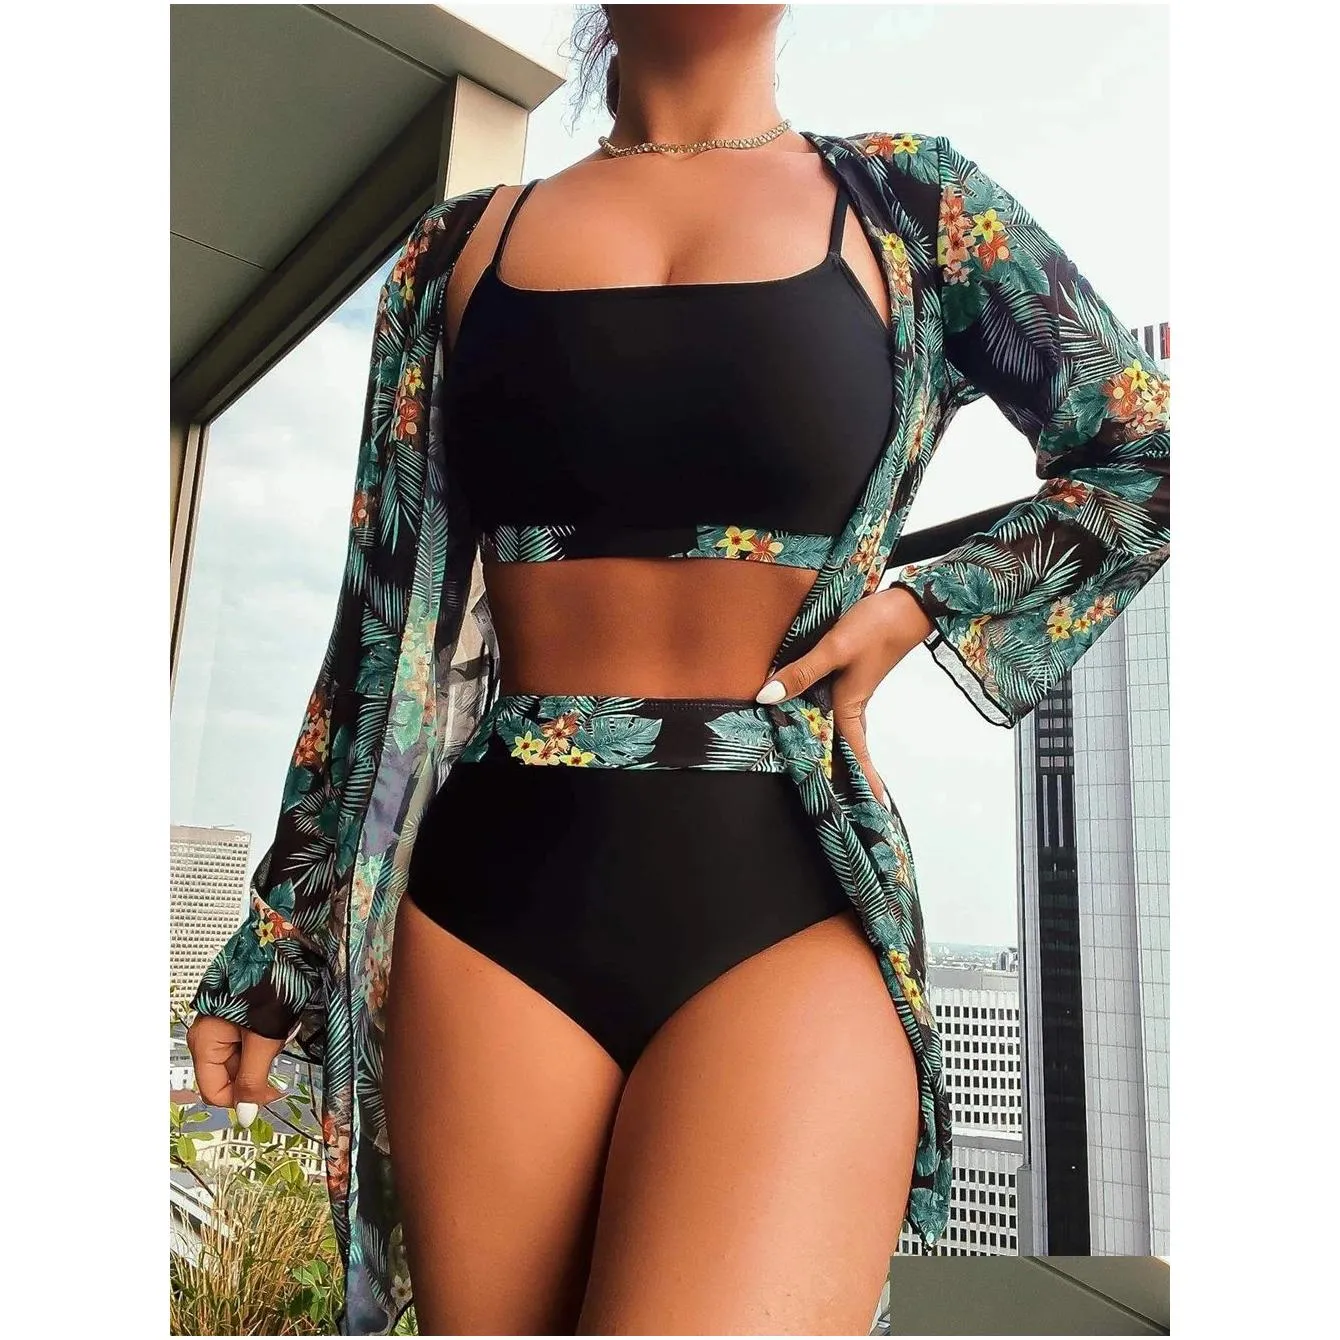 Hot Selling Women Bikini 3 Pieces Suit Black/Green/Red Bikini Sets With Long Sleeved Cover Ups High Quality Size Small-XXLarge